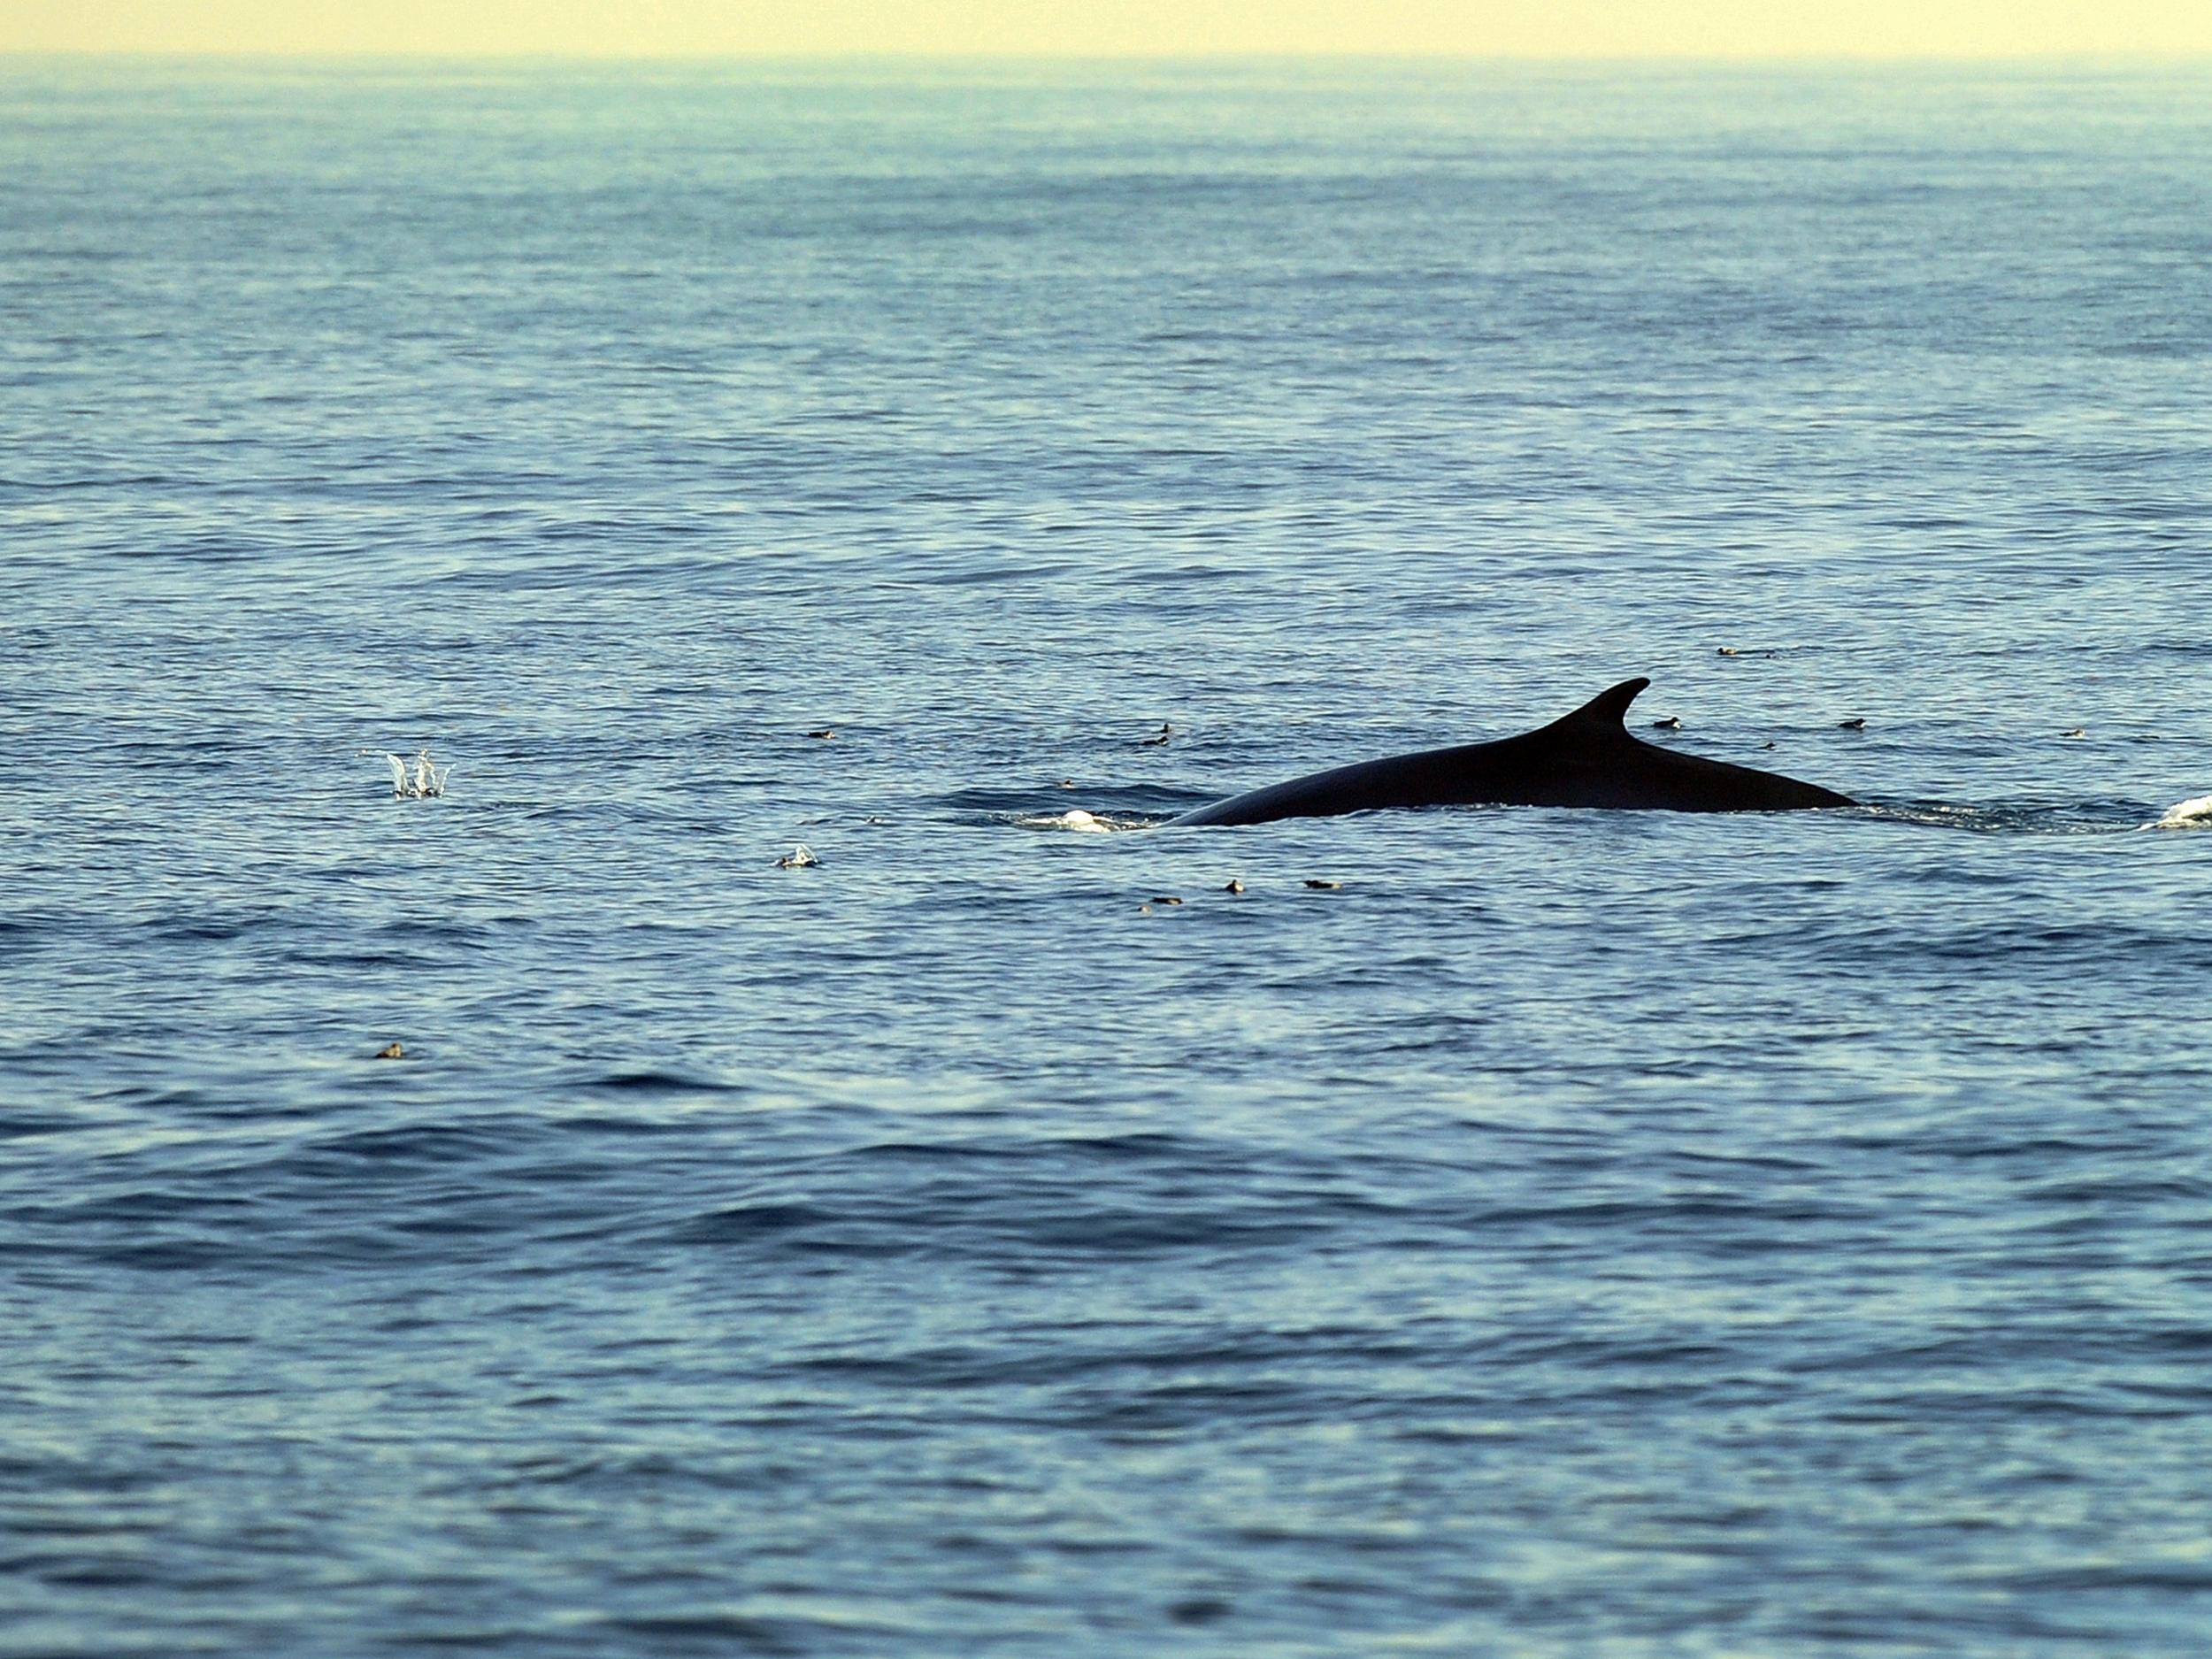 A Fin whale, which grows up to nearly 27-metres (88 feet long), making it the second largest whale, is seen in the Pacific Ocean